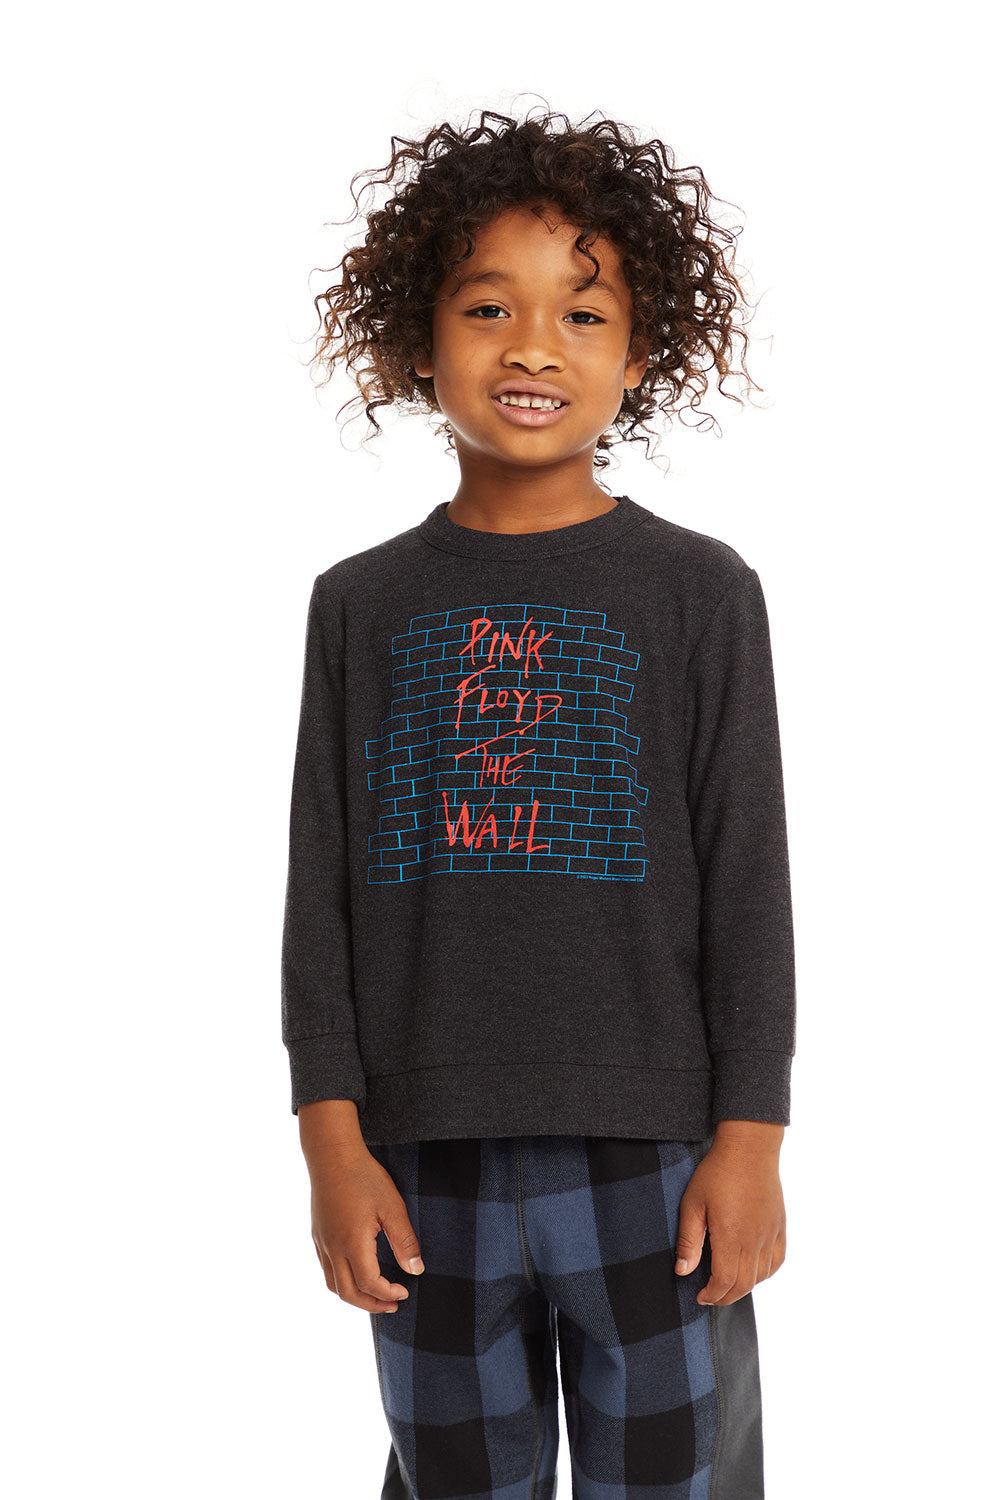 Pink Floyd The Wall Long Sleeve BOYS chaserbrand